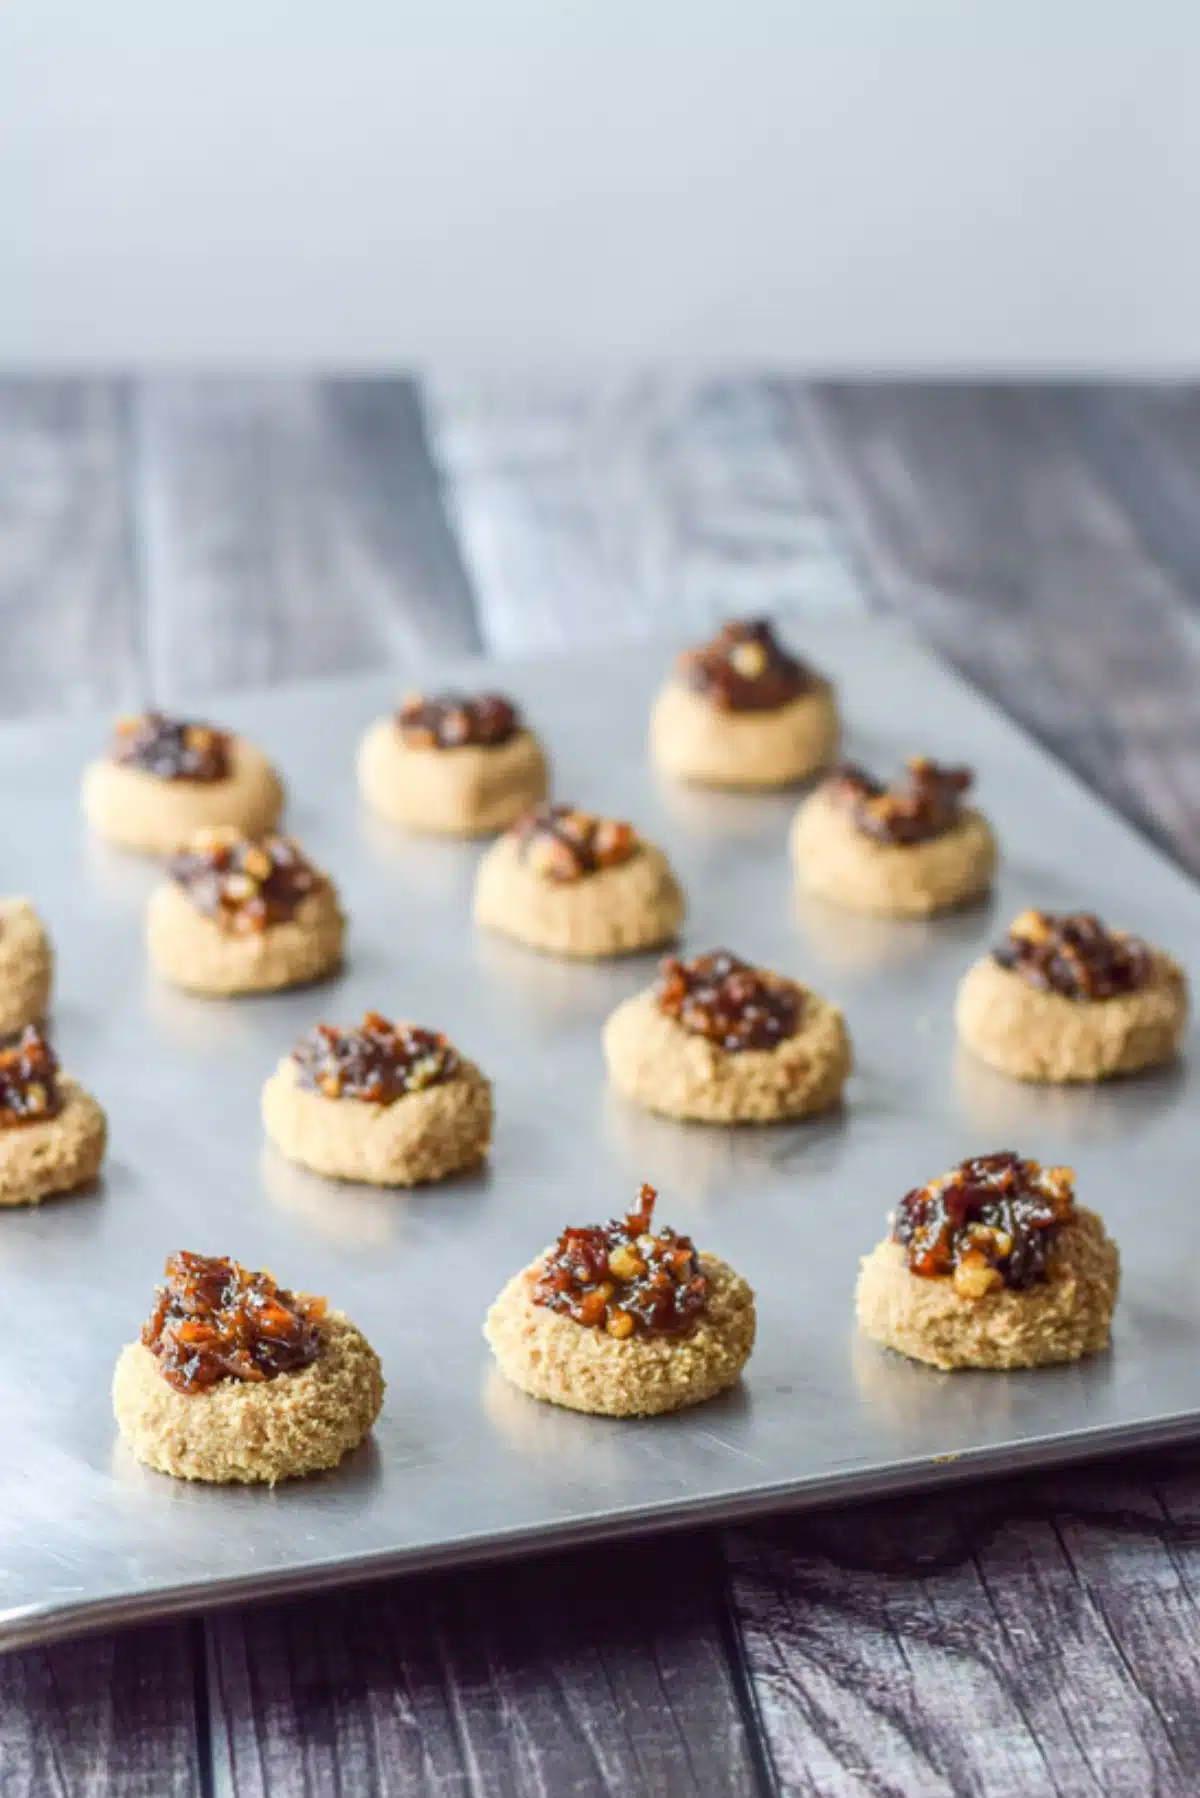 Dates and nuts put in the thumbprints on a cookie sheet